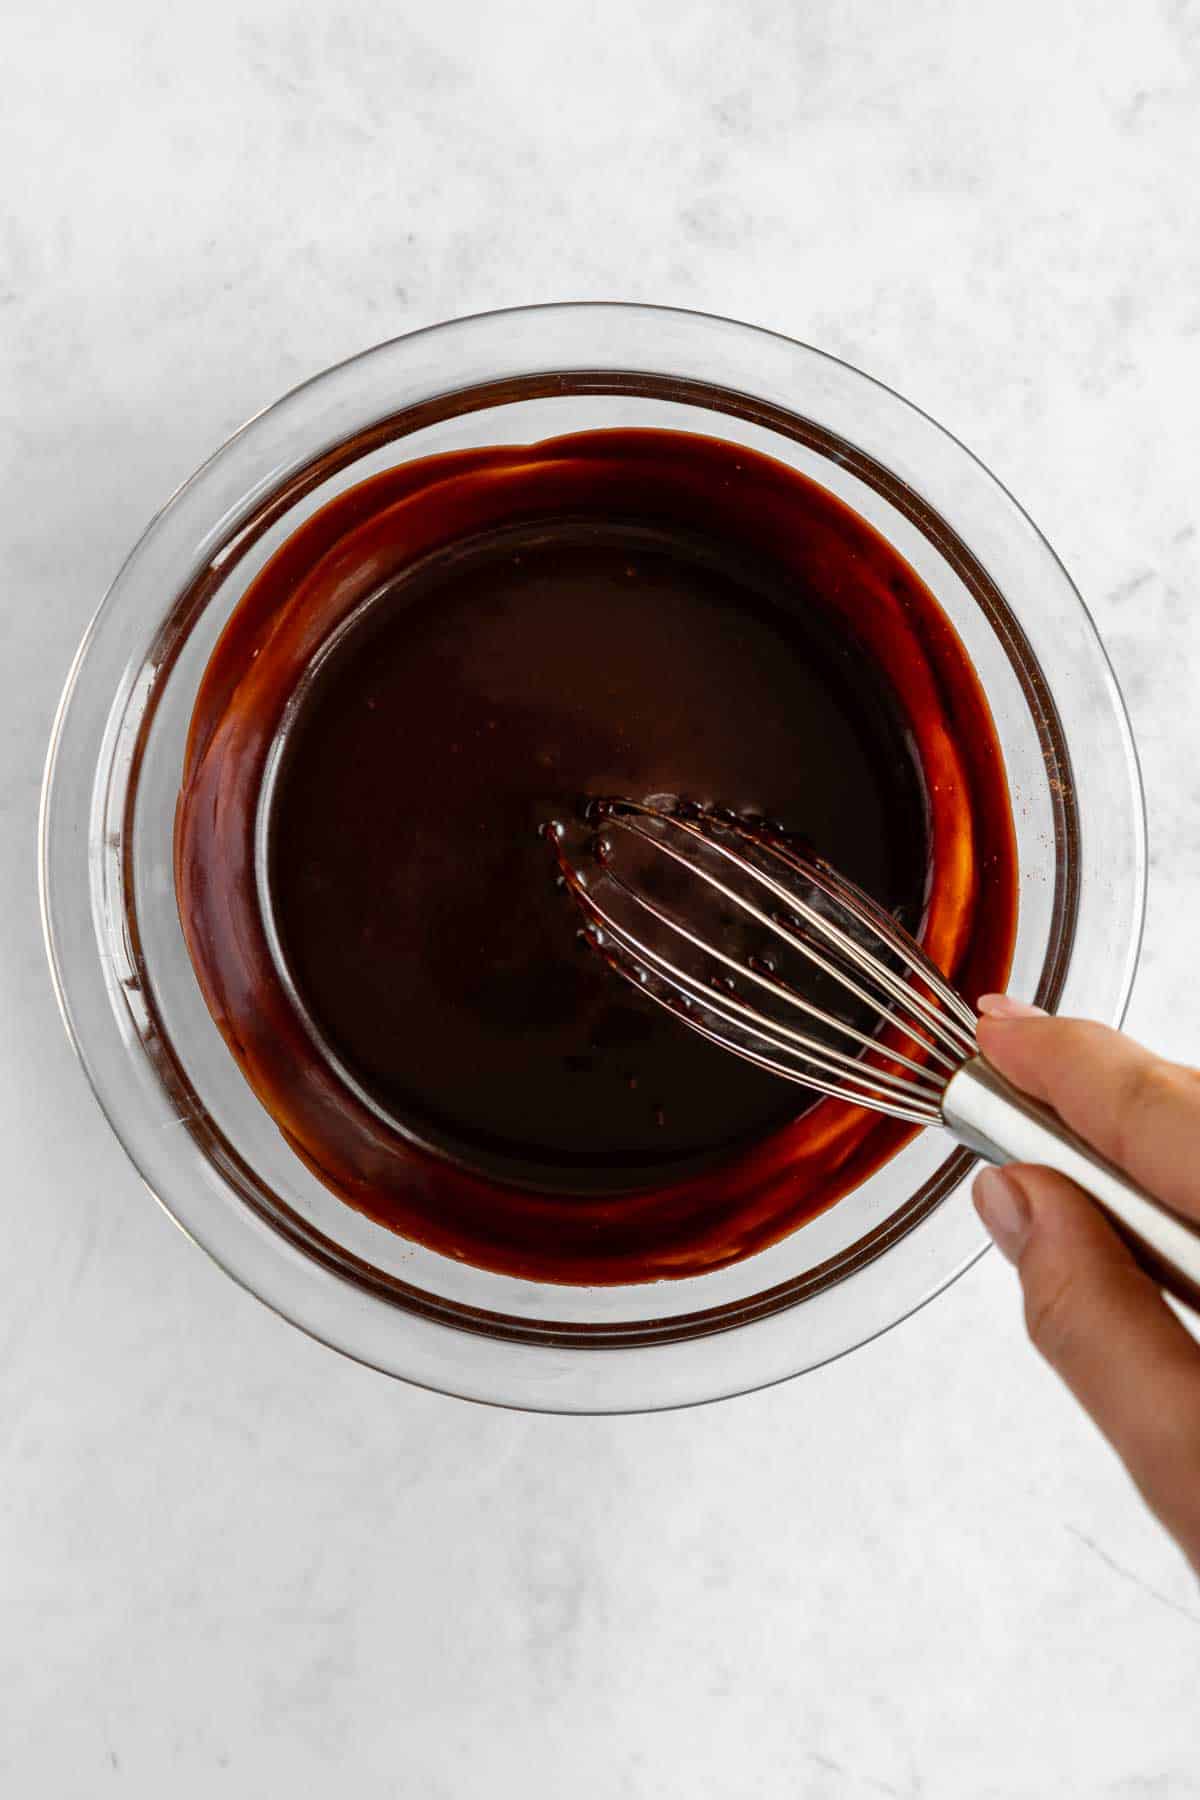 whisking chocolate ganache in a glass bowl